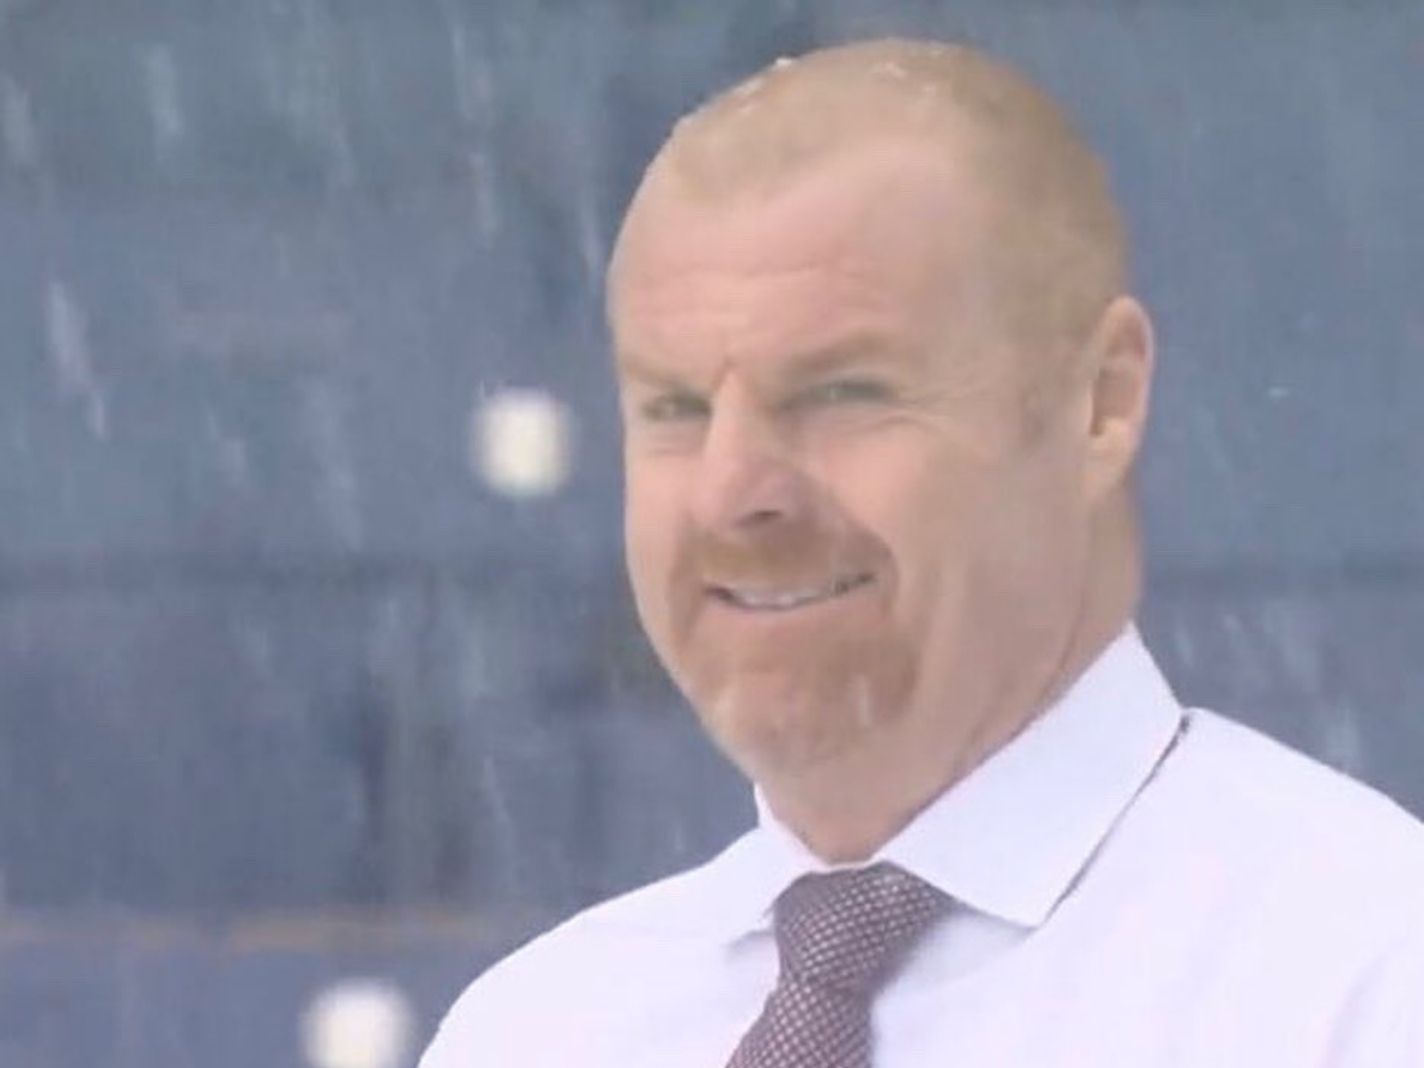 Twitter reacts to Sean Dyche braving minus 3-degree weather in shirt and tie